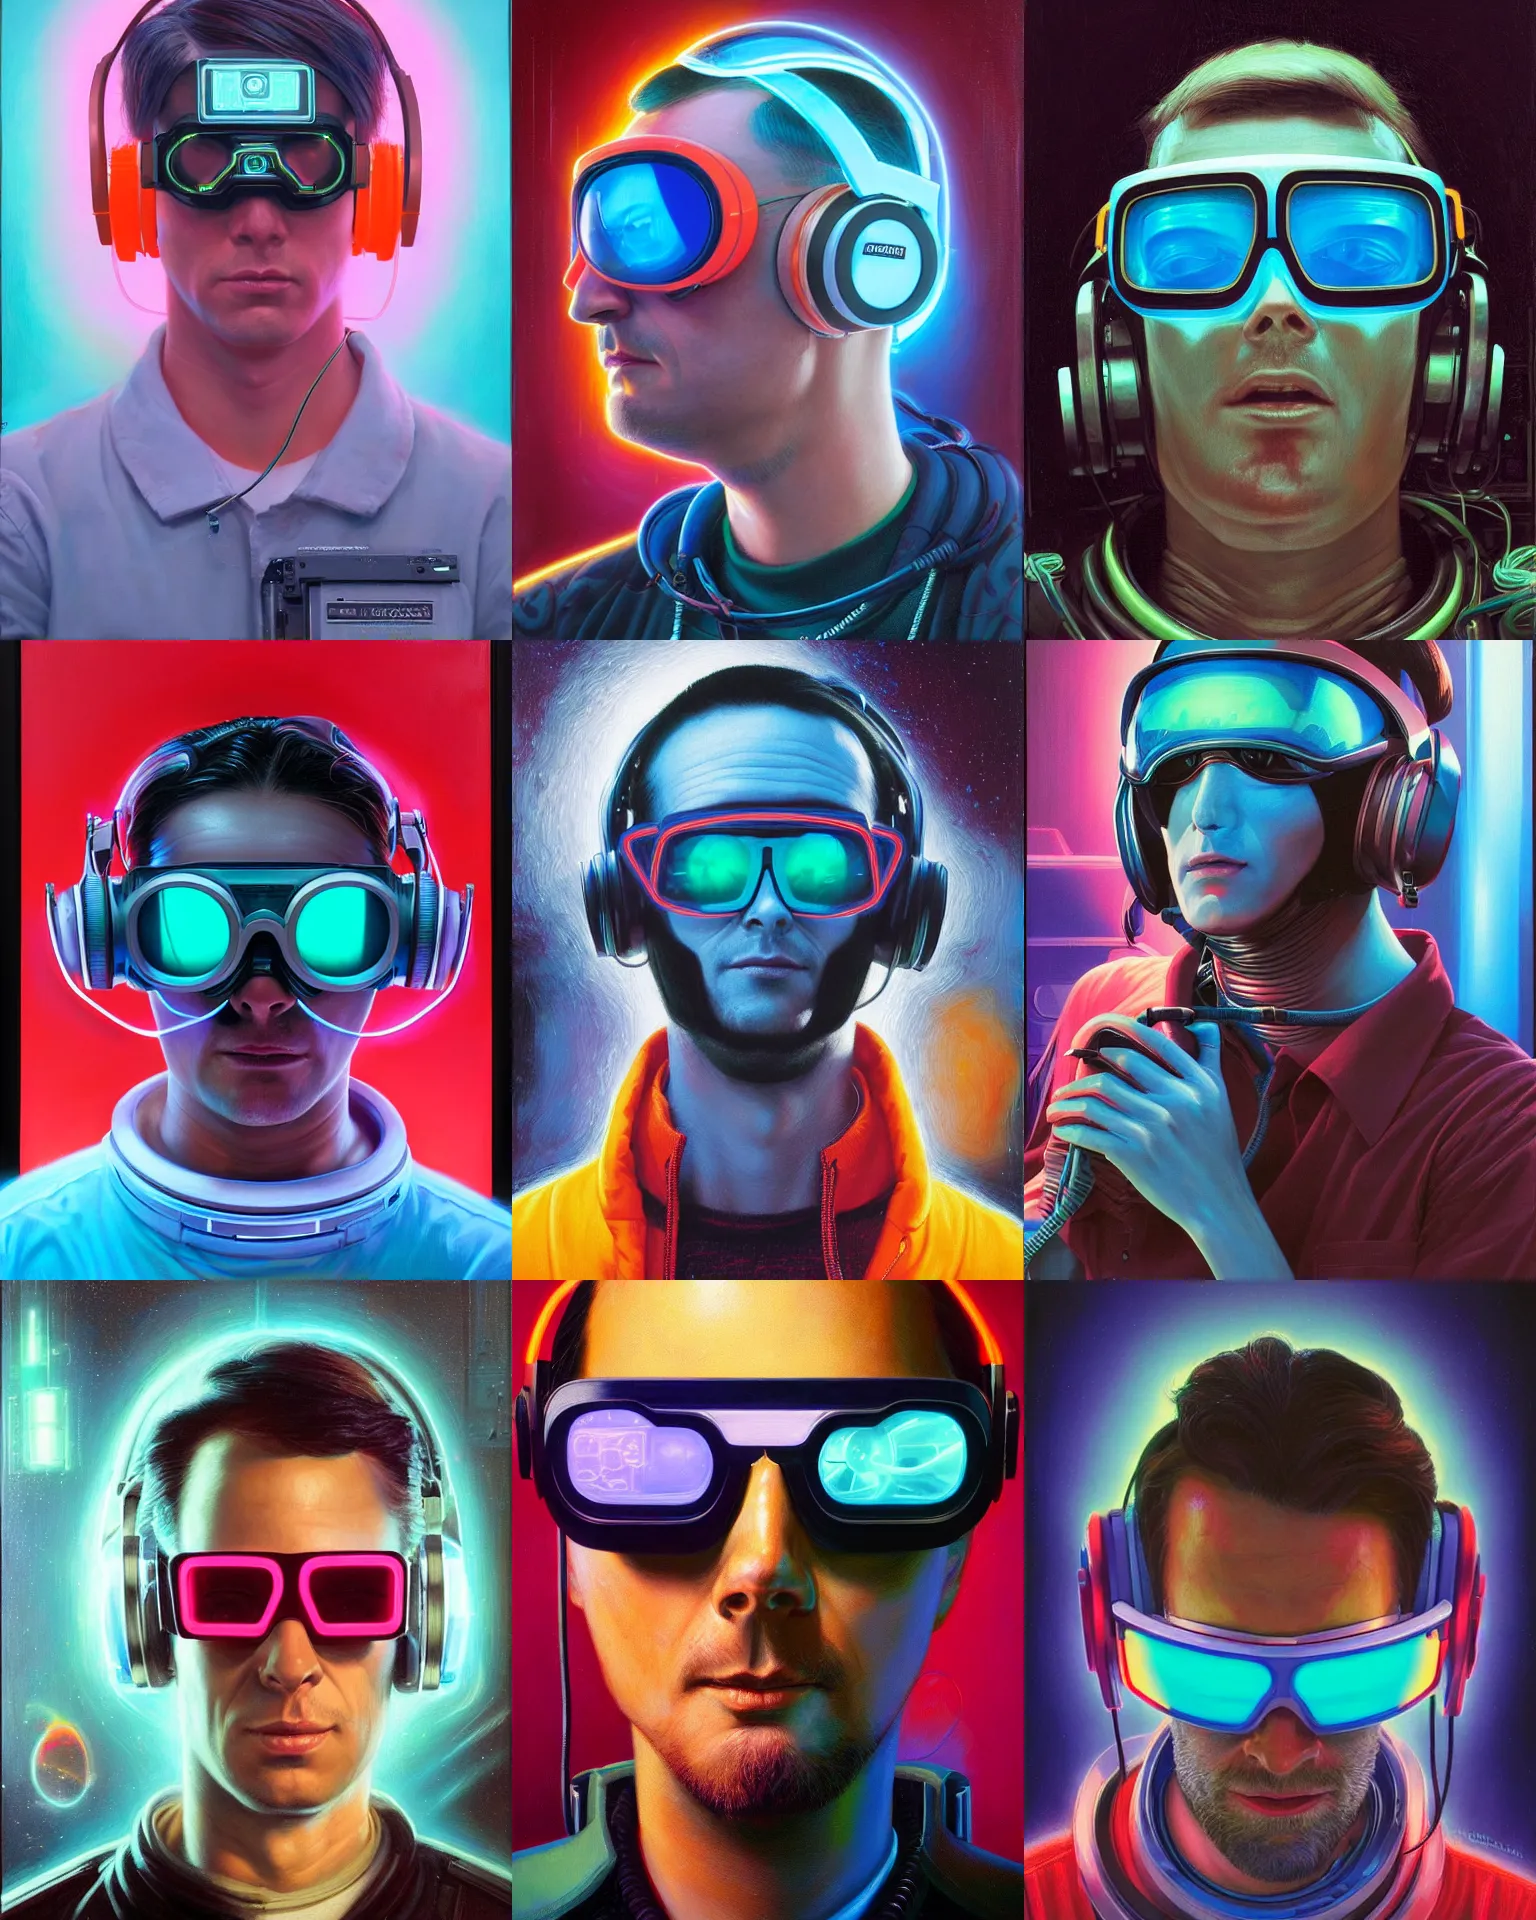 Prompt: neon cyberpunk programmer with thin cyan laser visor glasses over eyes and sleek headphones headshot desaturated portrait painting by donato giancola, dean cornwall, rhads, tom whalen, alex grey astronaut fashion photography